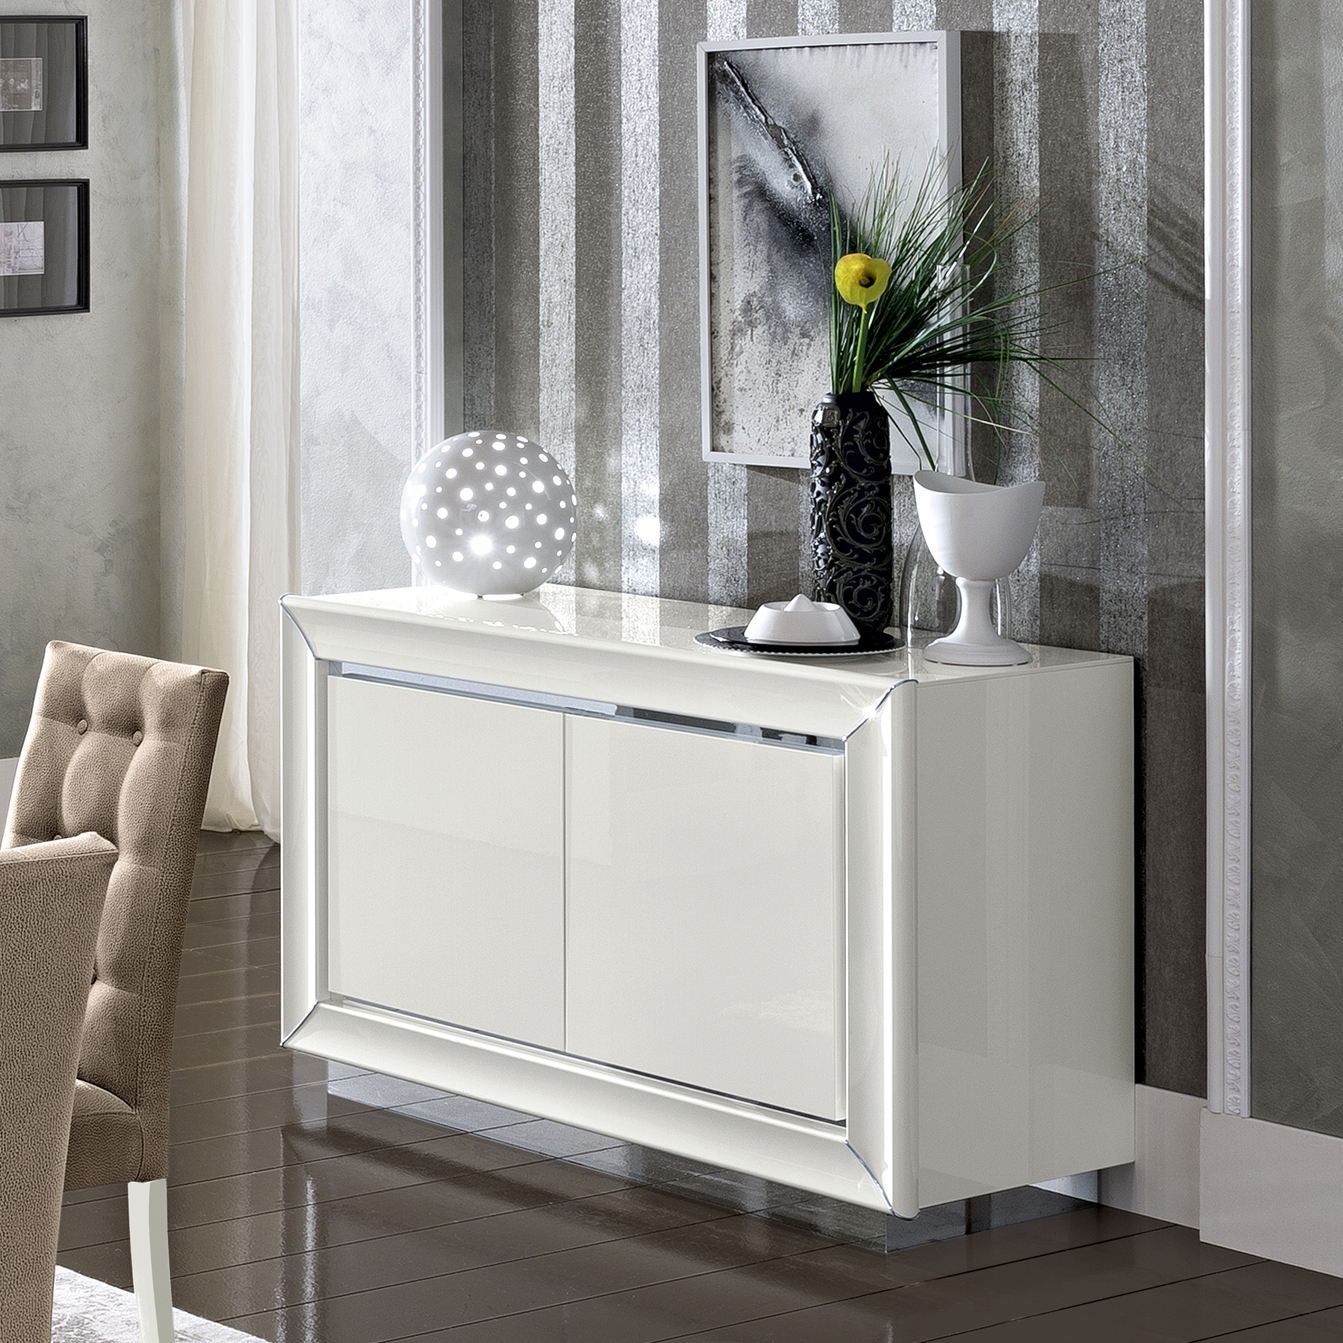 Bianca White 2dr Small Sideboard